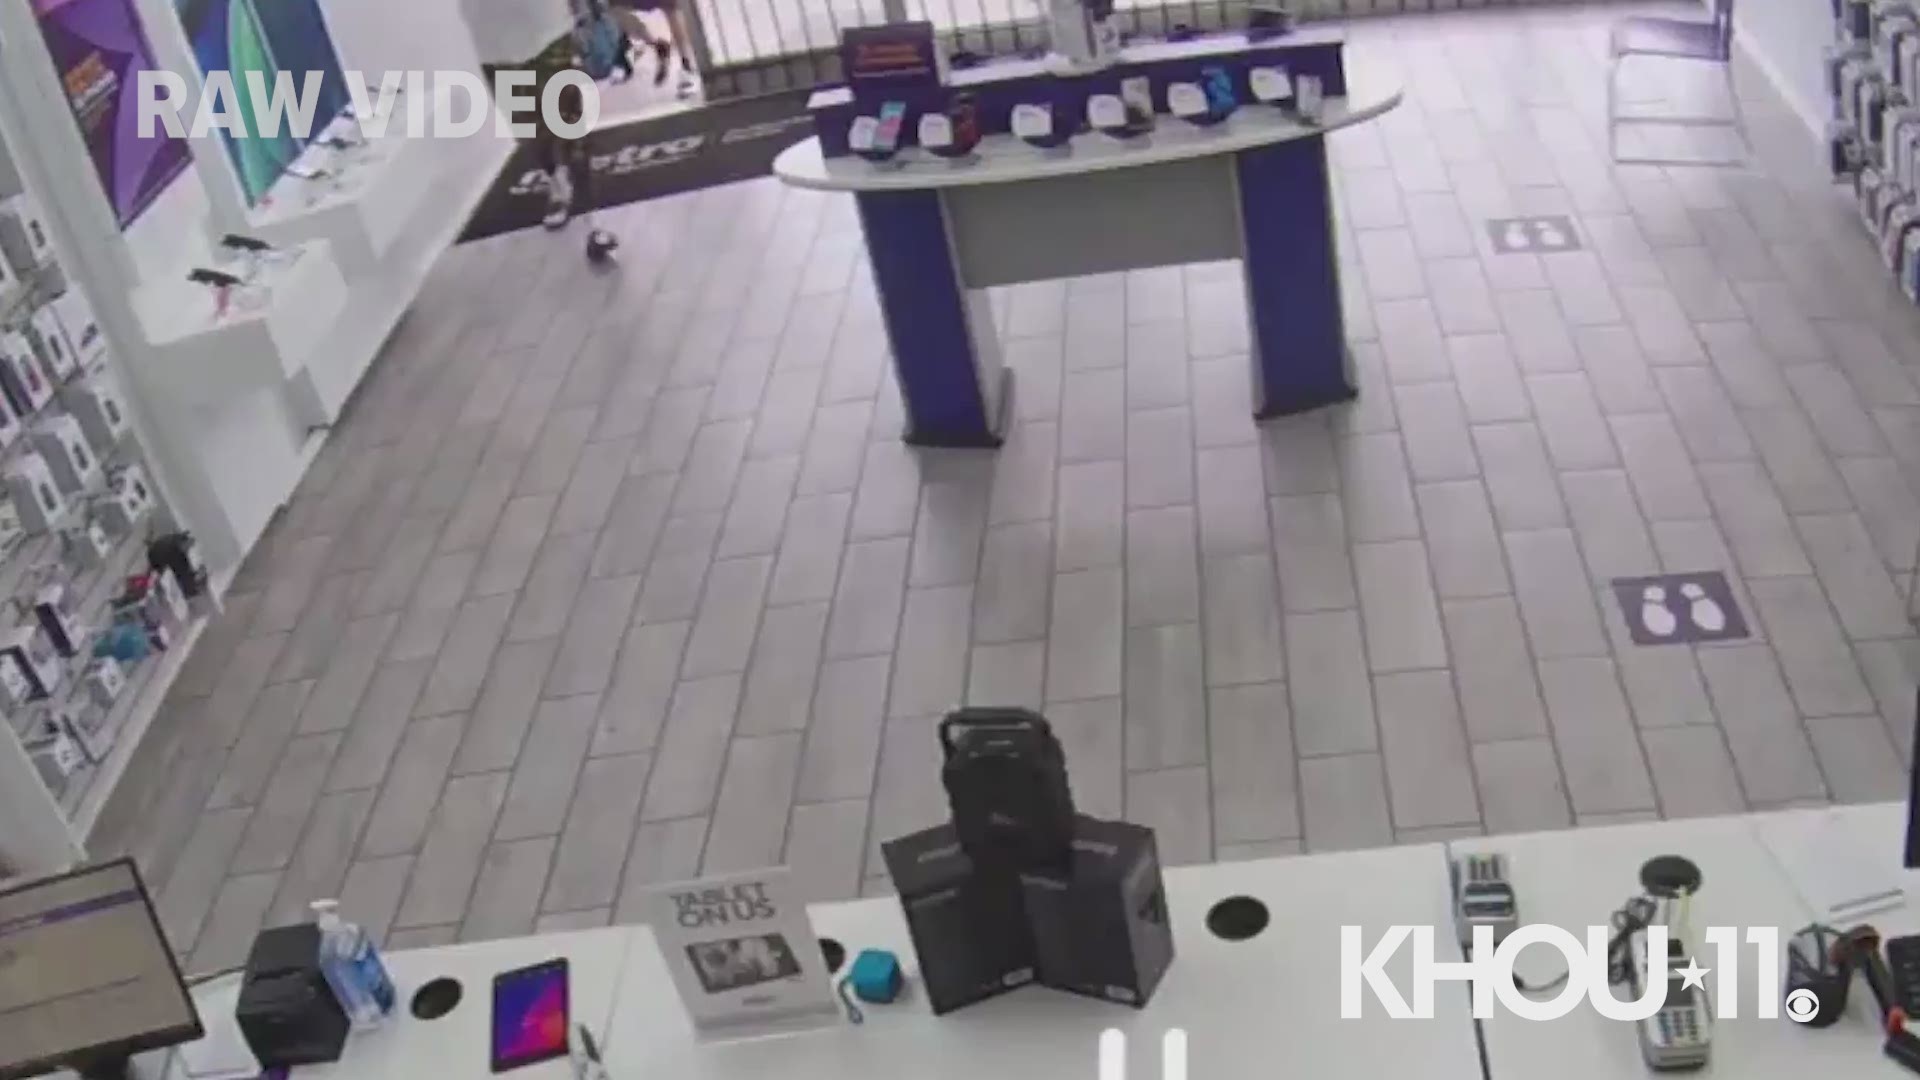 Footage from a store robbery in Houston shows a man trying to fist bump an employee after forcing the worker to hand over cash.